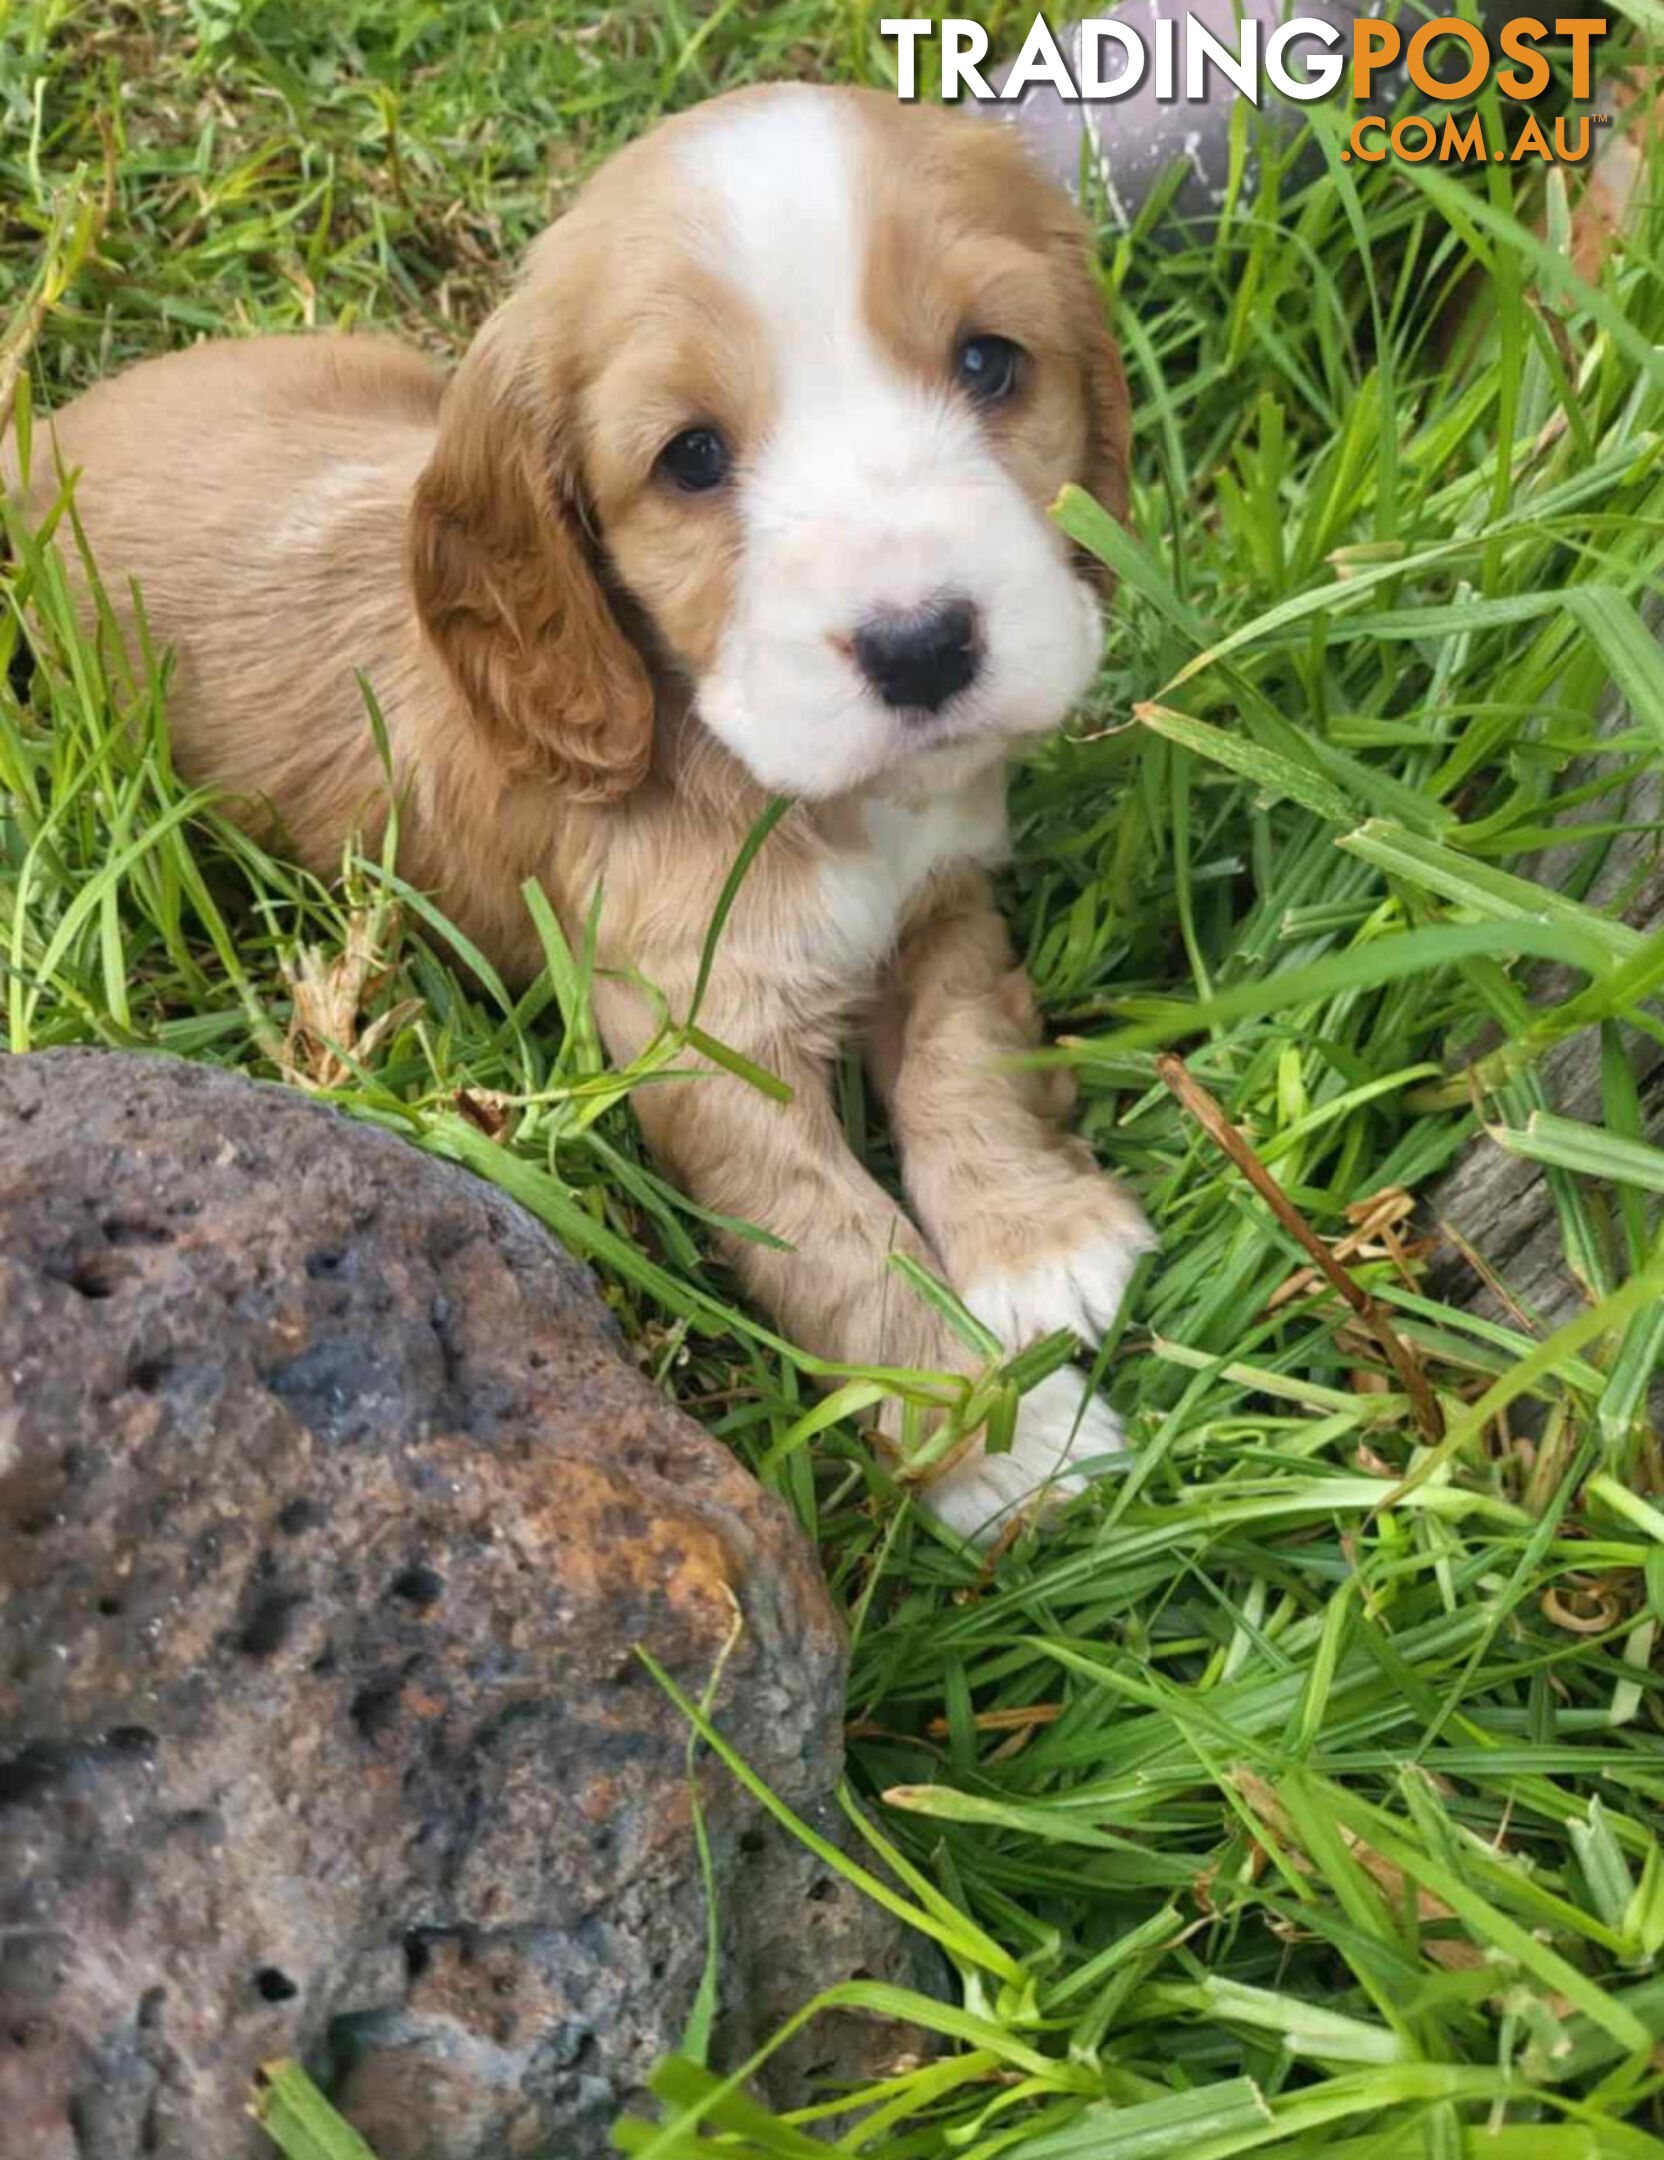 Pure bred cockerspaniels puppies